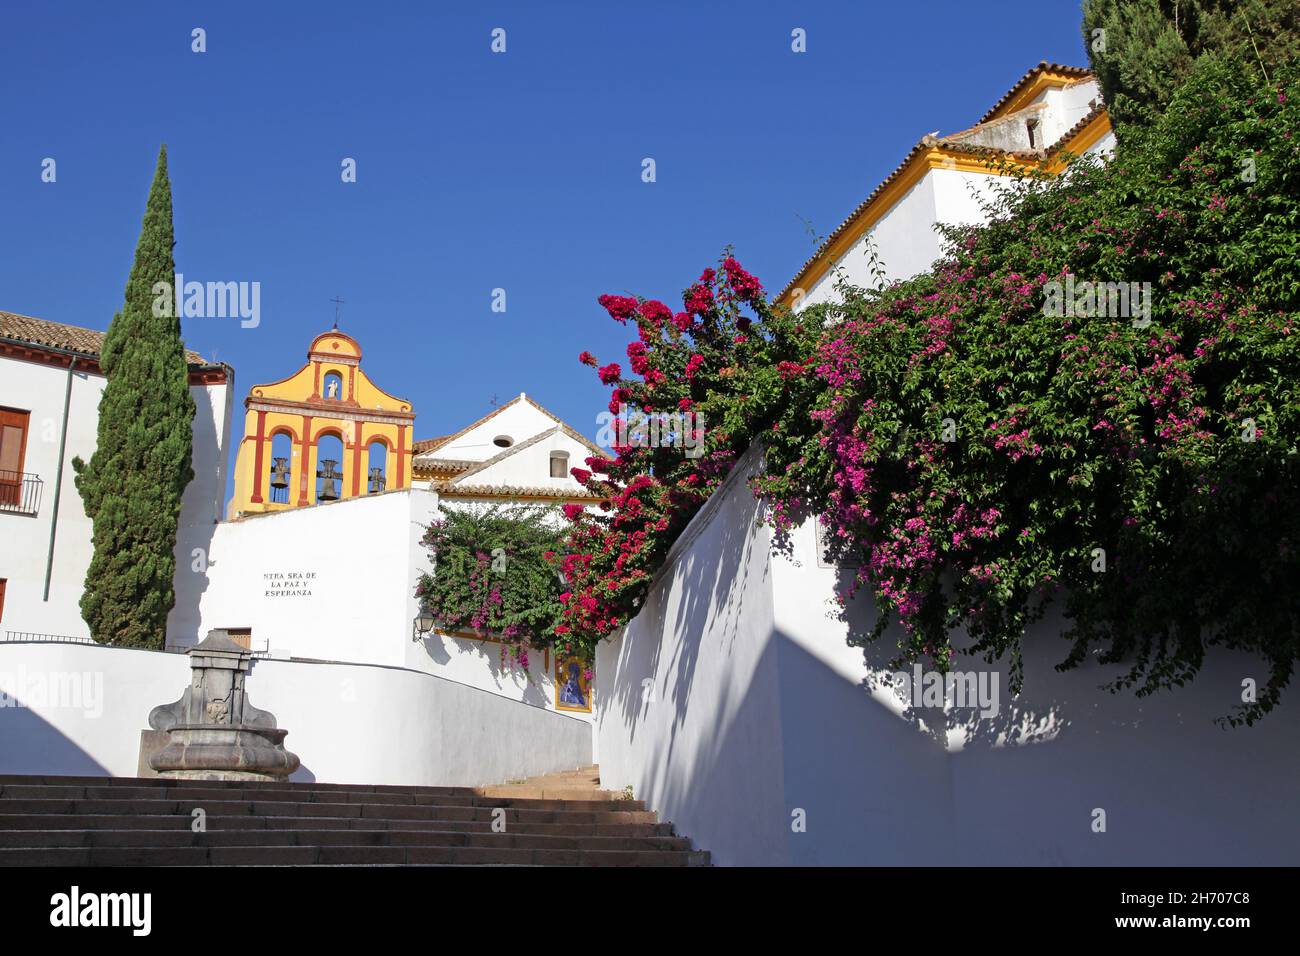 Plaza Nuestra Señora de la Paz y Esperanza in Córdoba Spain.Square next to the Christ of the Lanterns,full of flowers and steps that lead to the Bailio slope. Stock Photo